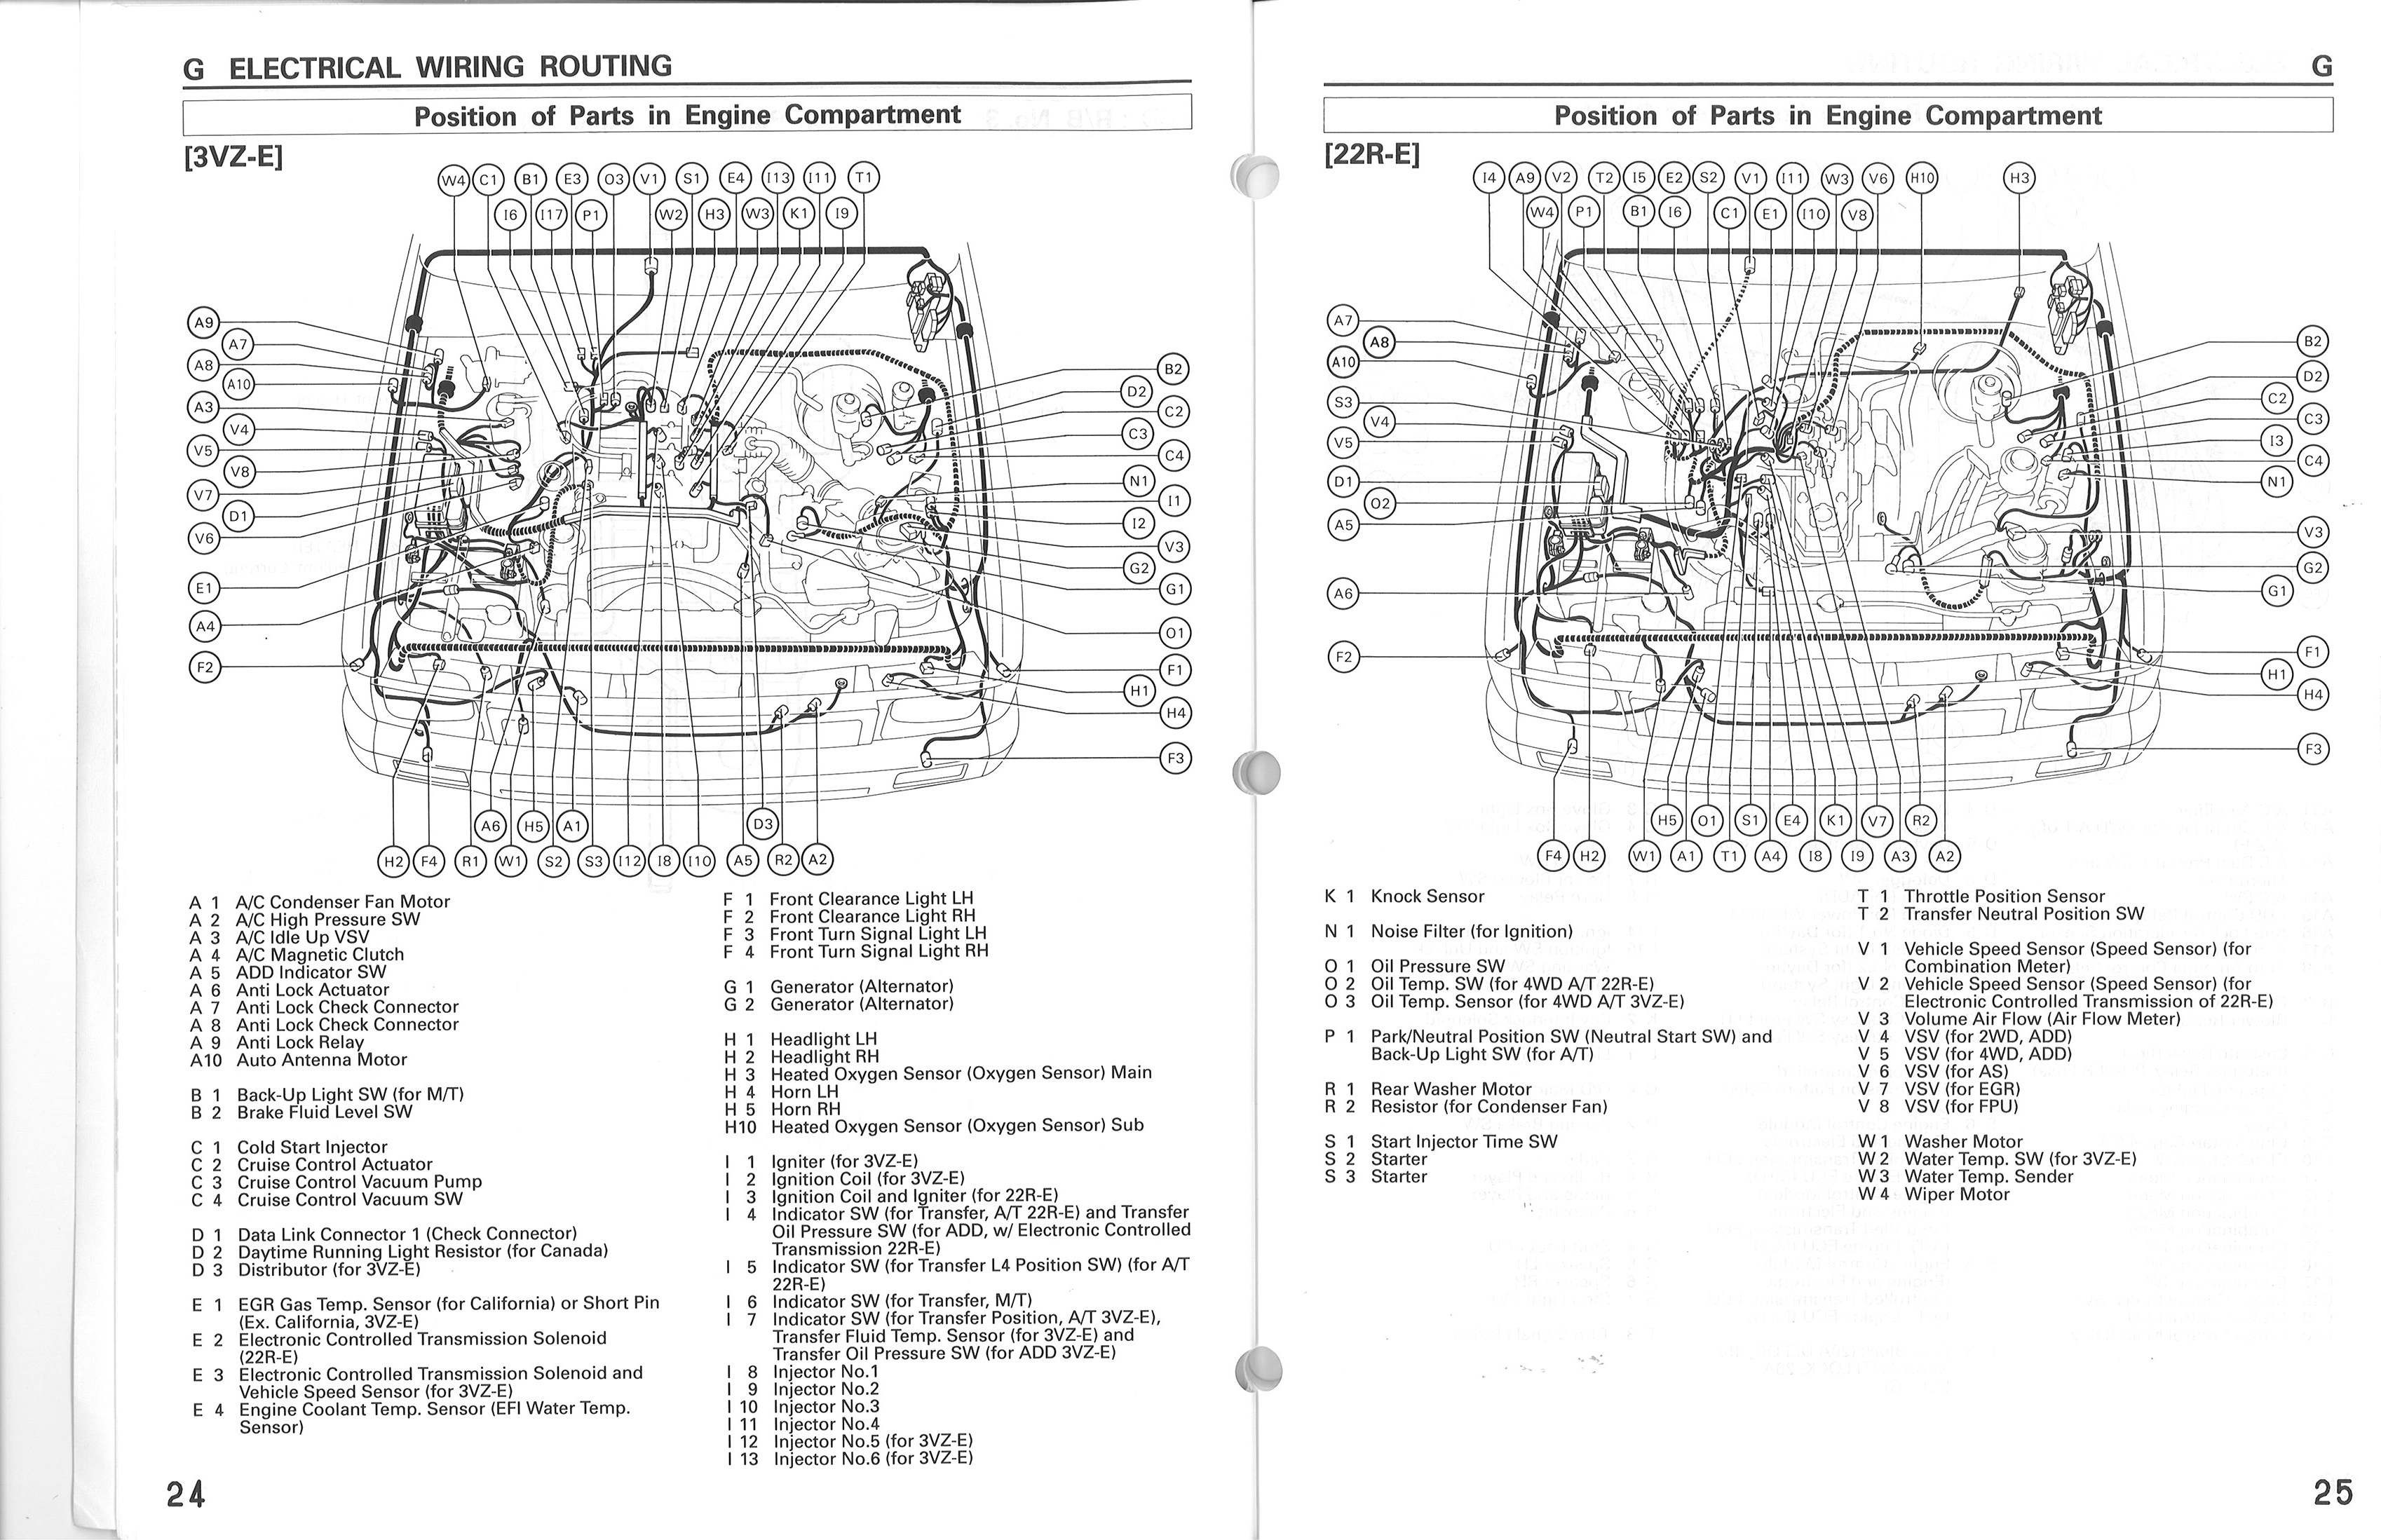 1995 toyota Tacoma Parts Diagram 1991 Nissan D21 Truck 24 Engine Vacuum Diagram solved Fixya Wiring Of 1995 toyota Tacoma Parts Diagram